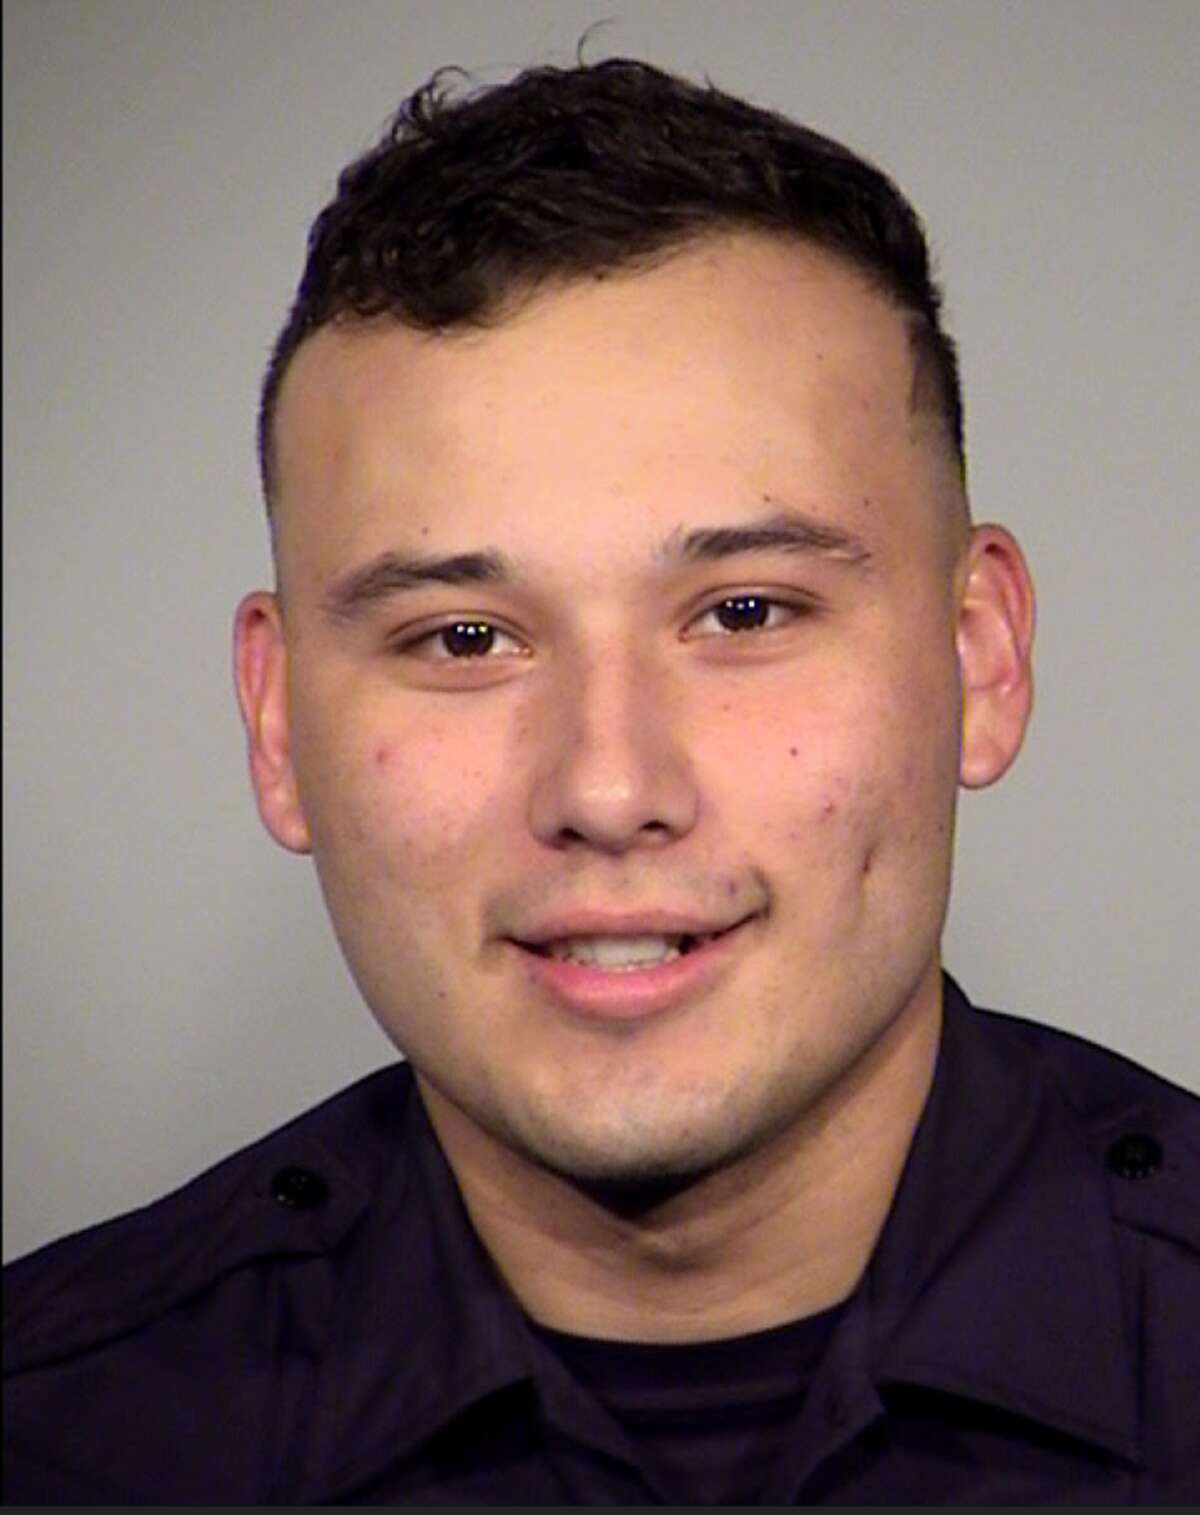 San Antonio Police Officer Rafael Hernandez III, 26, was arrested for suspicion of DWI after he was caught driving 100 mph on Loop 410, SAPD said.